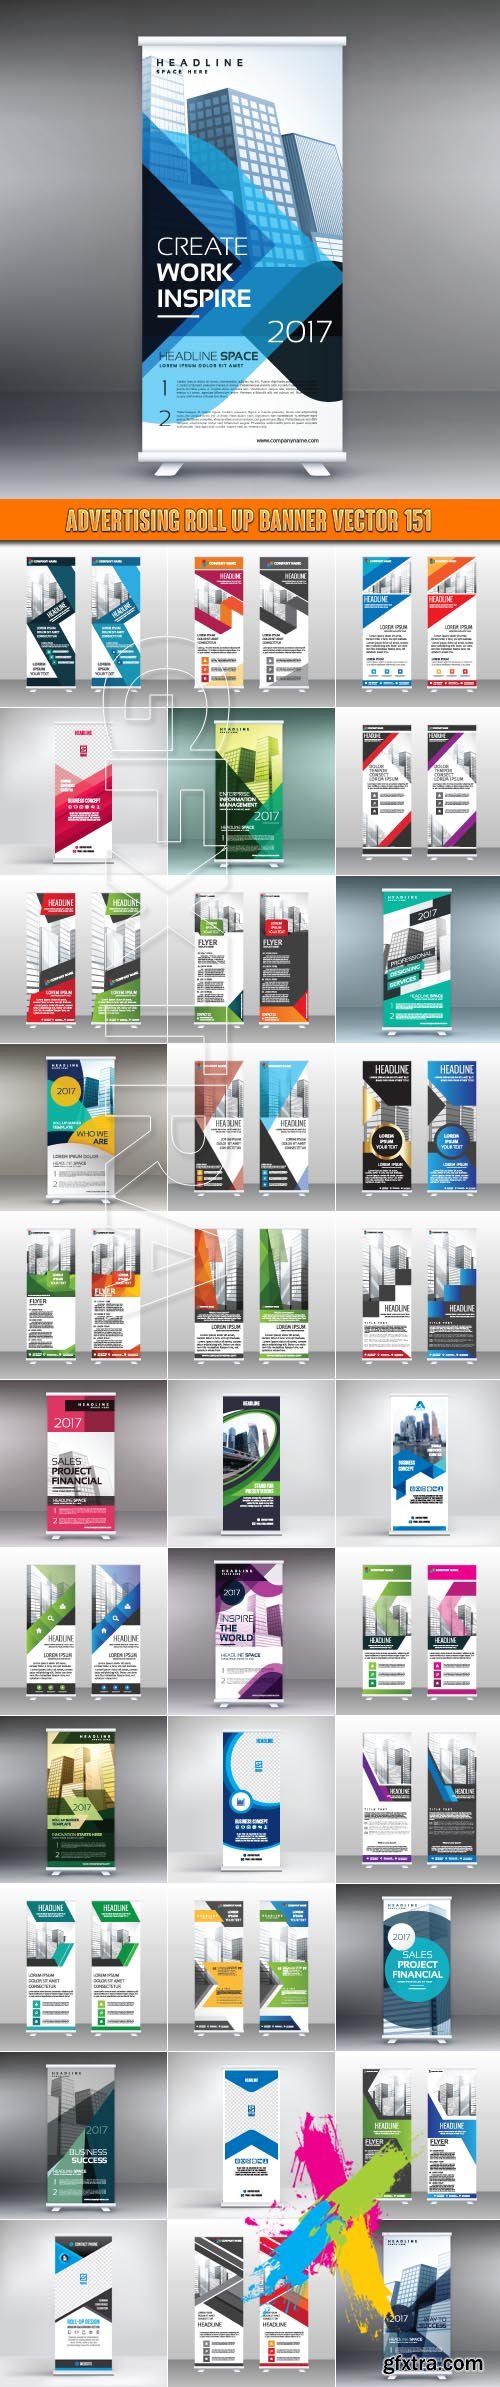 Advertising Roll up banner vector 151